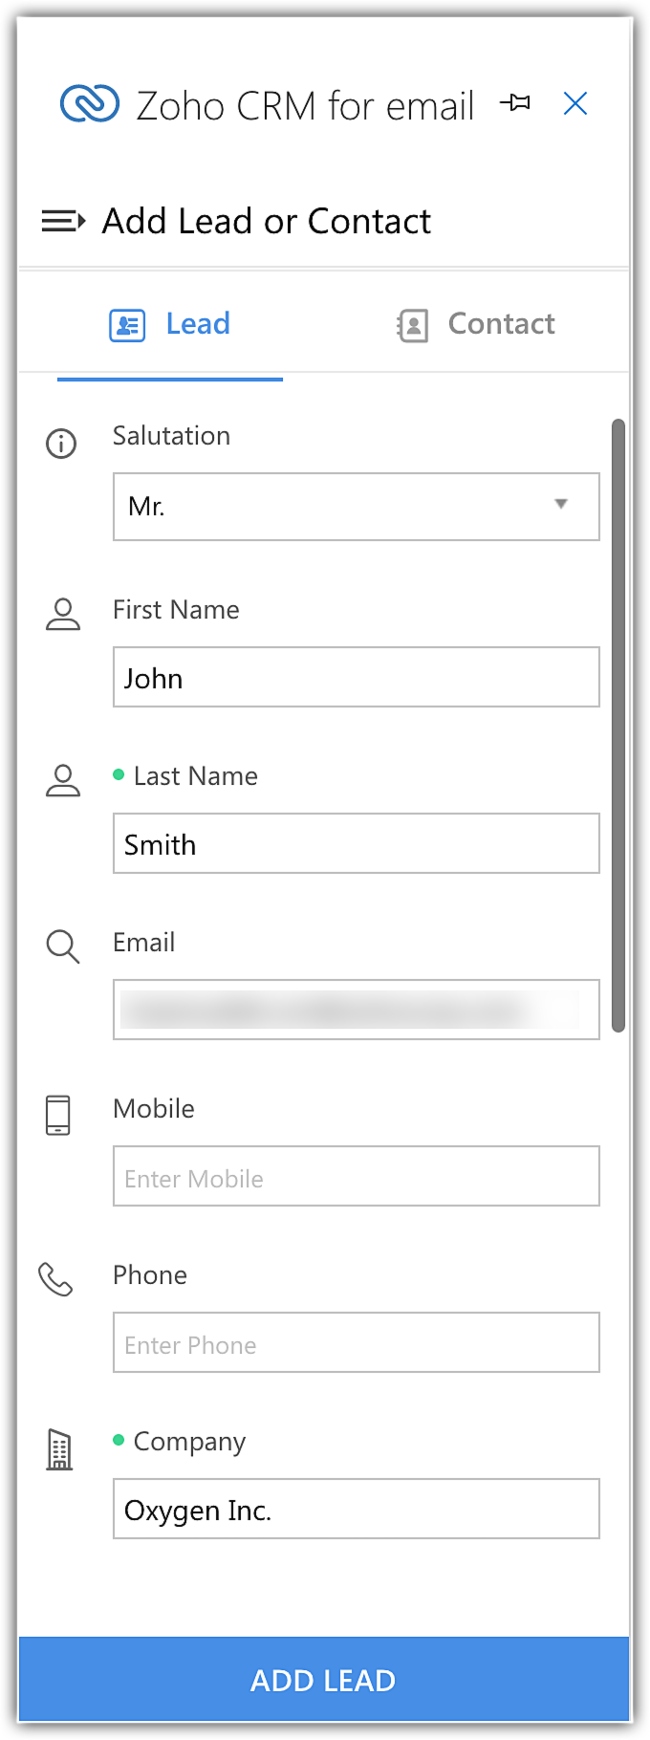 How to Add Leads or Contacts from Outlook to Zoho CRM